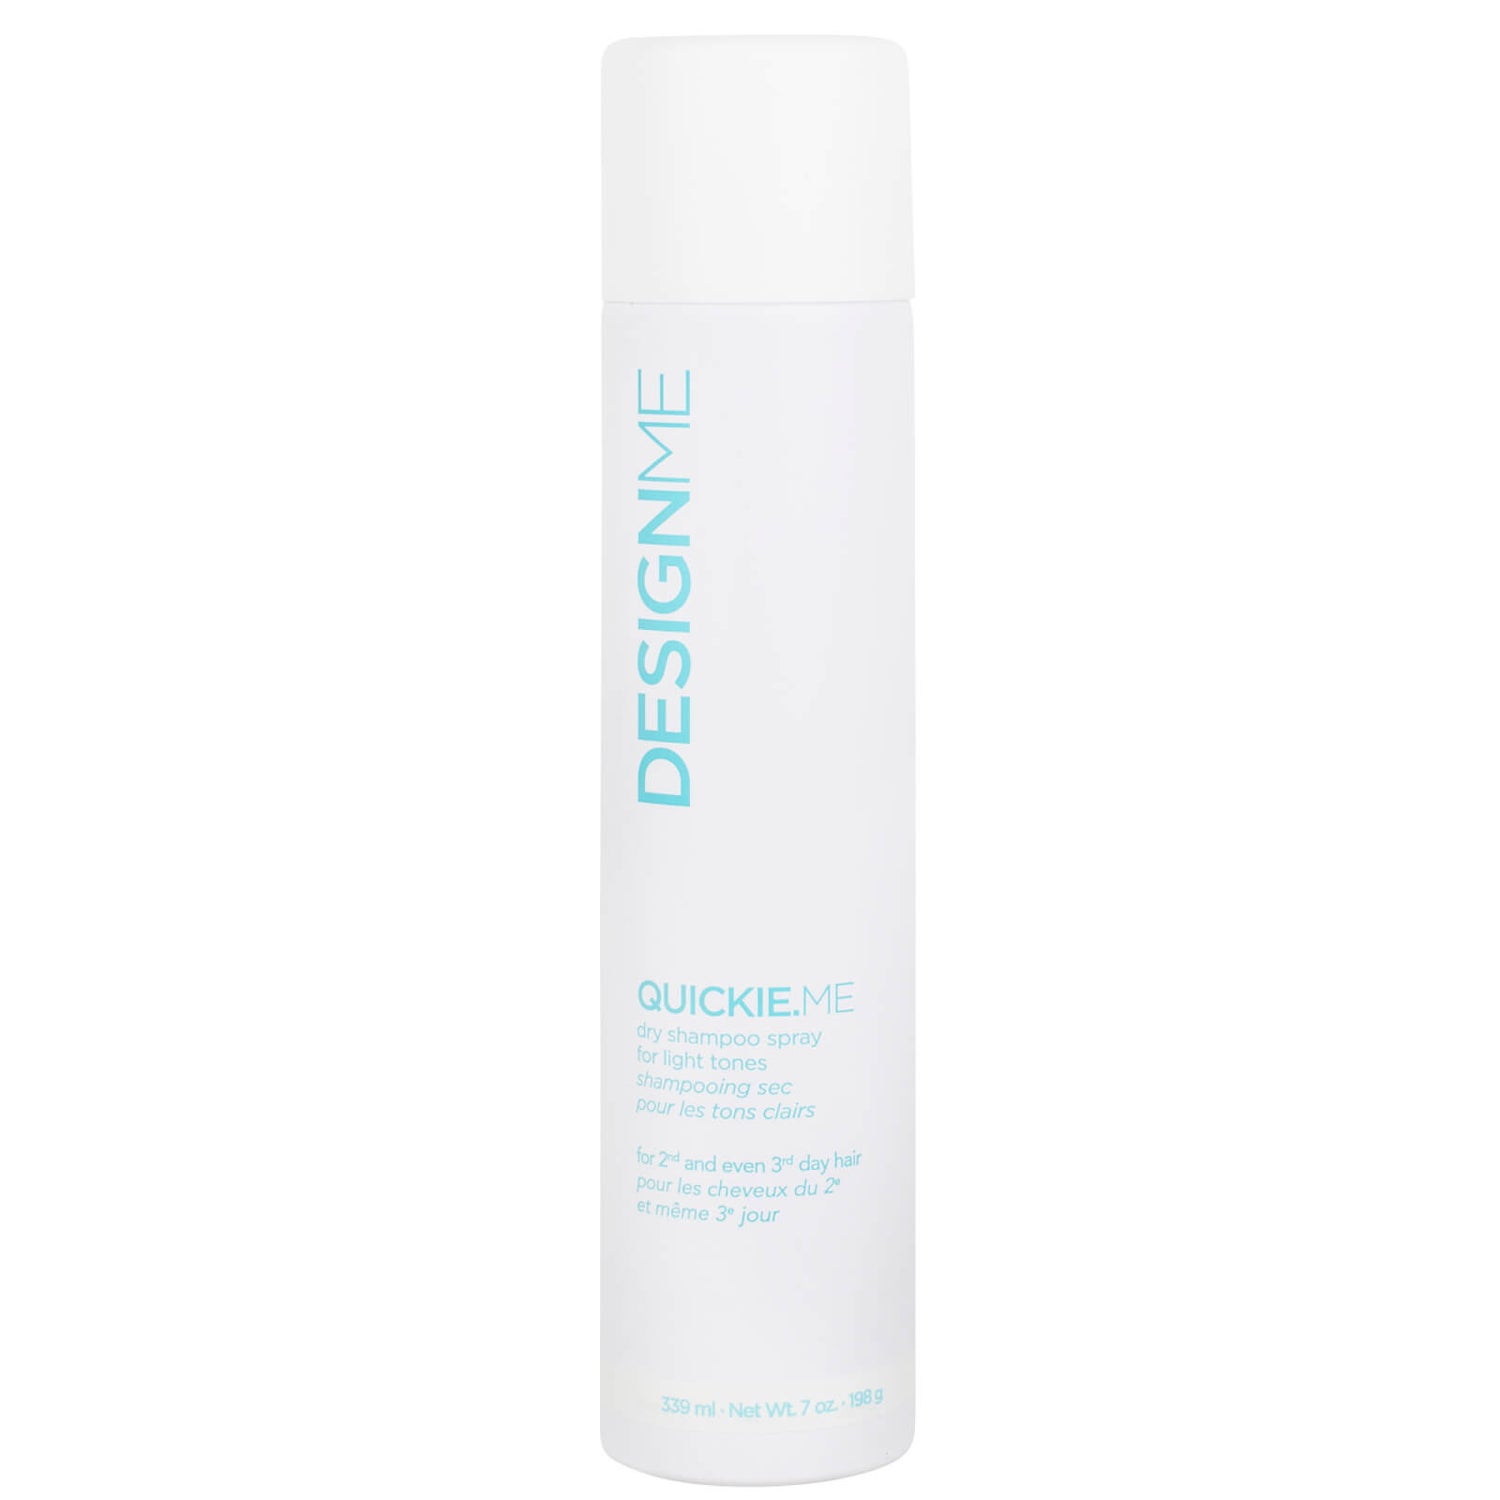 DESIGNME Quickie Me Dry Shampoo for Blonde and Pastel Tones 339ml